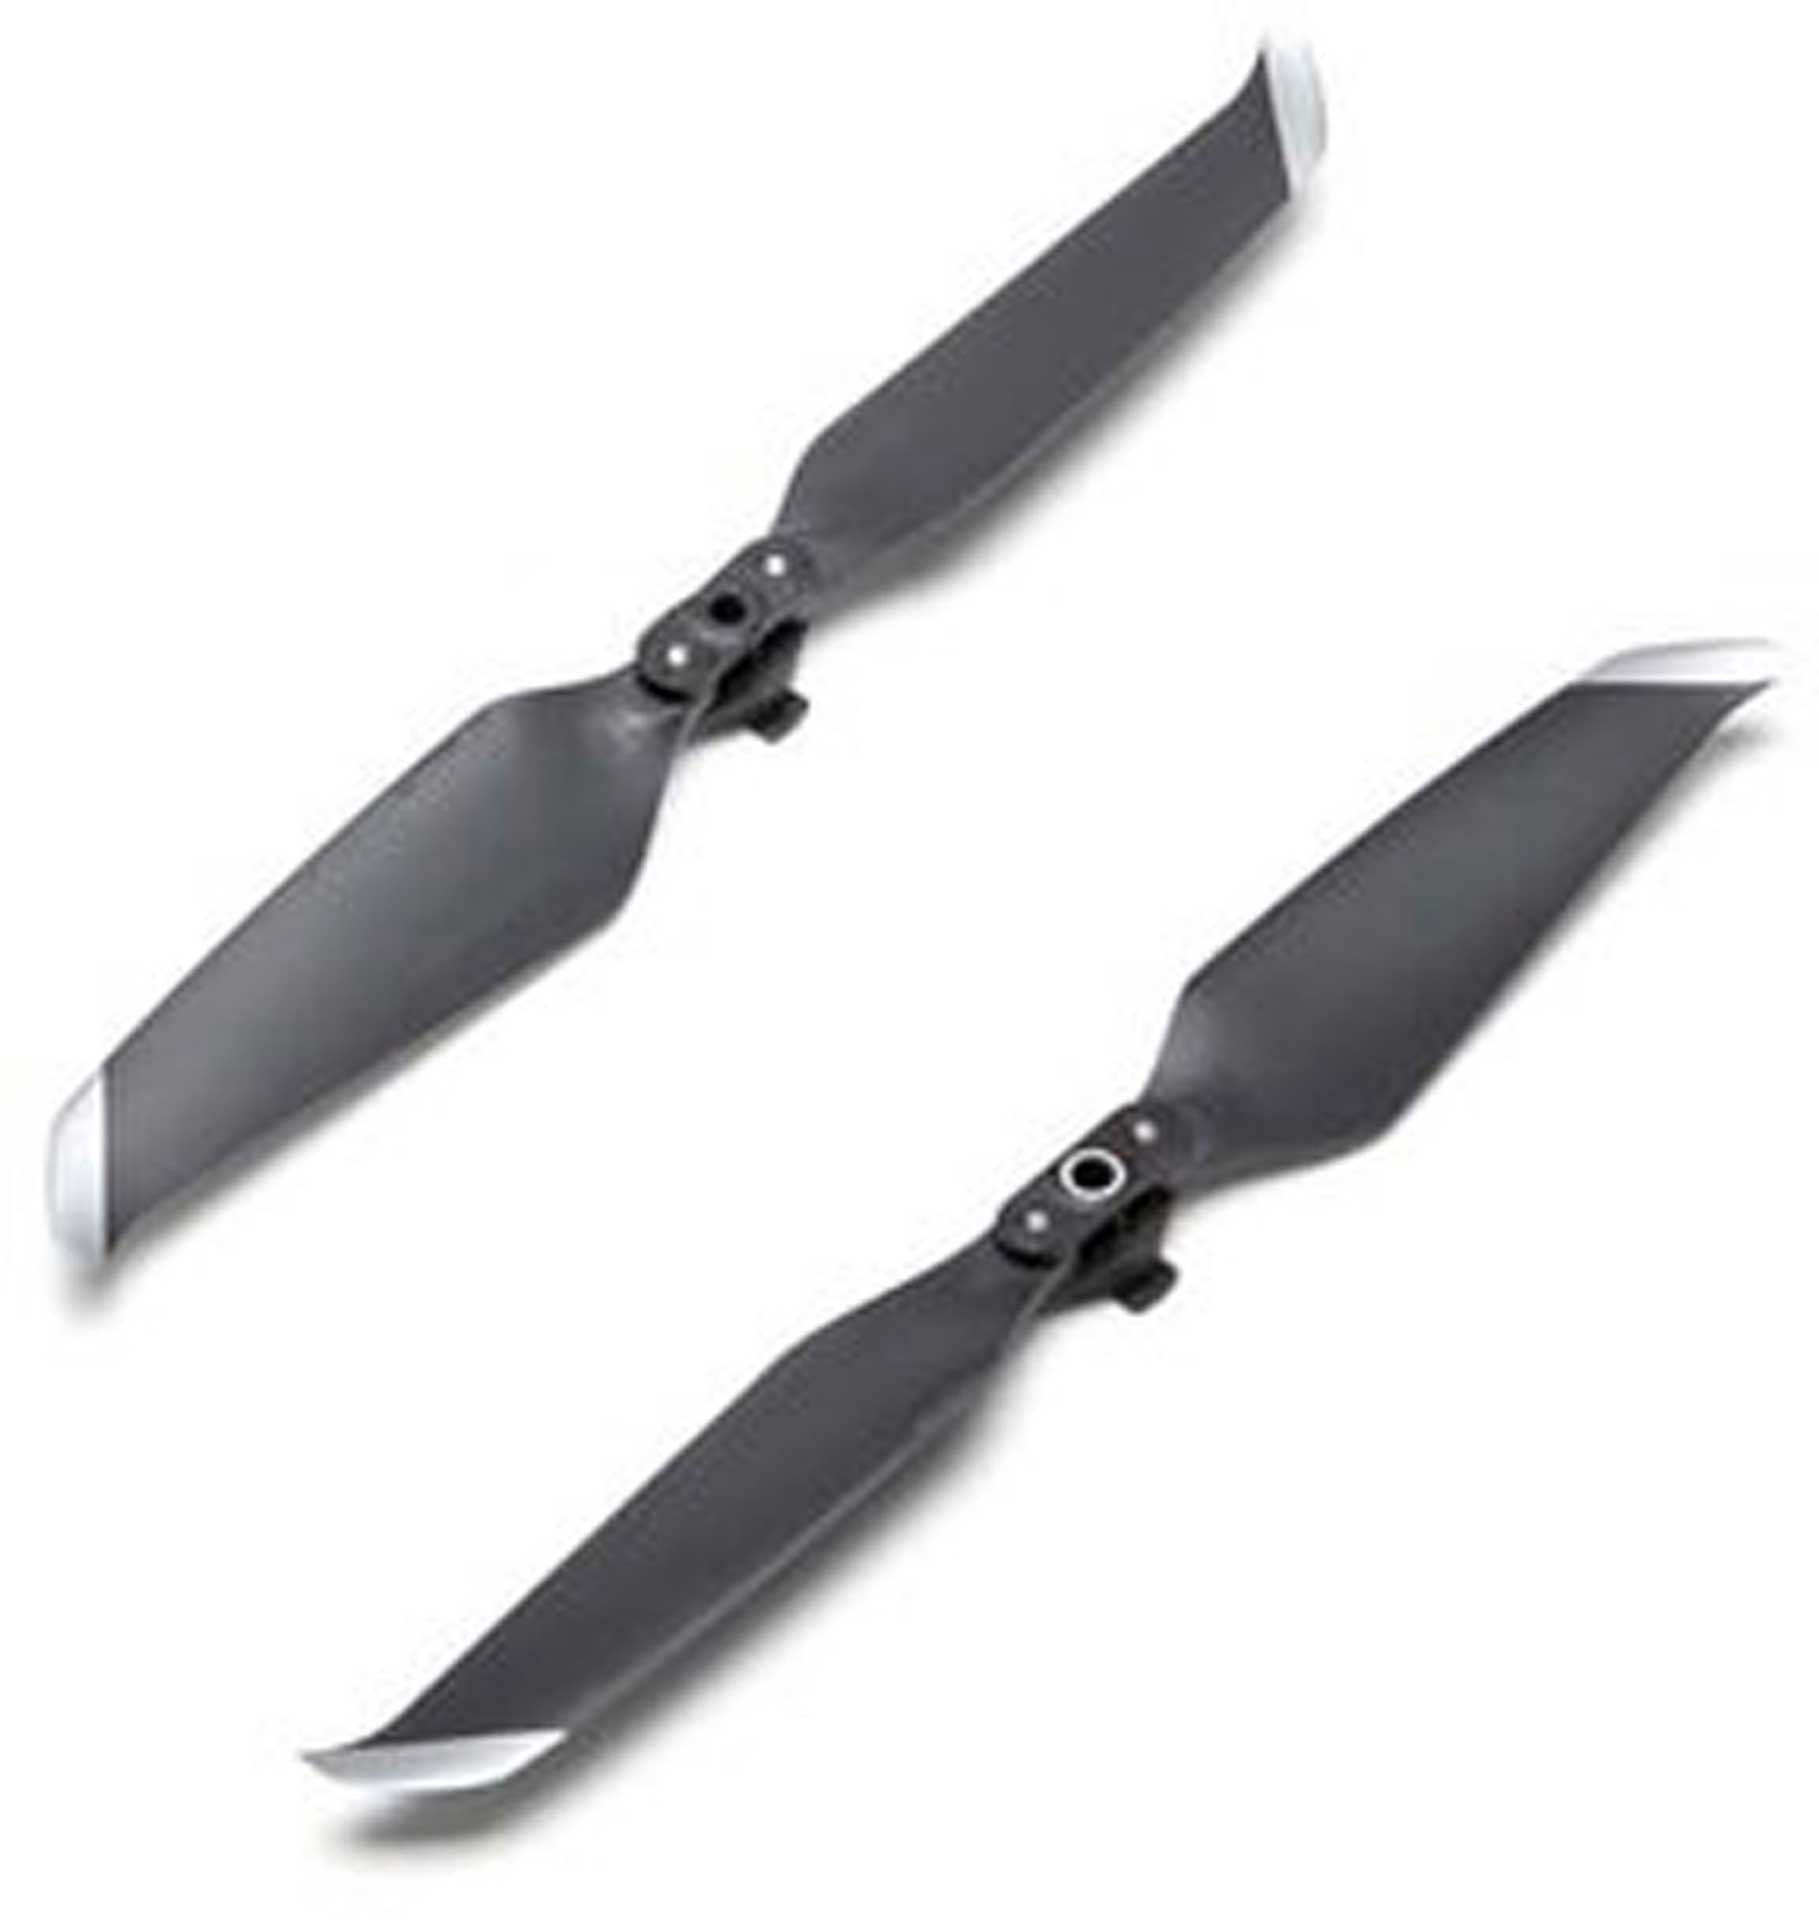 DJI MAVIC AIR 2 LOW-NOISE PROPELLERS (PAIR) 1XCW UND 1X CCW PROP